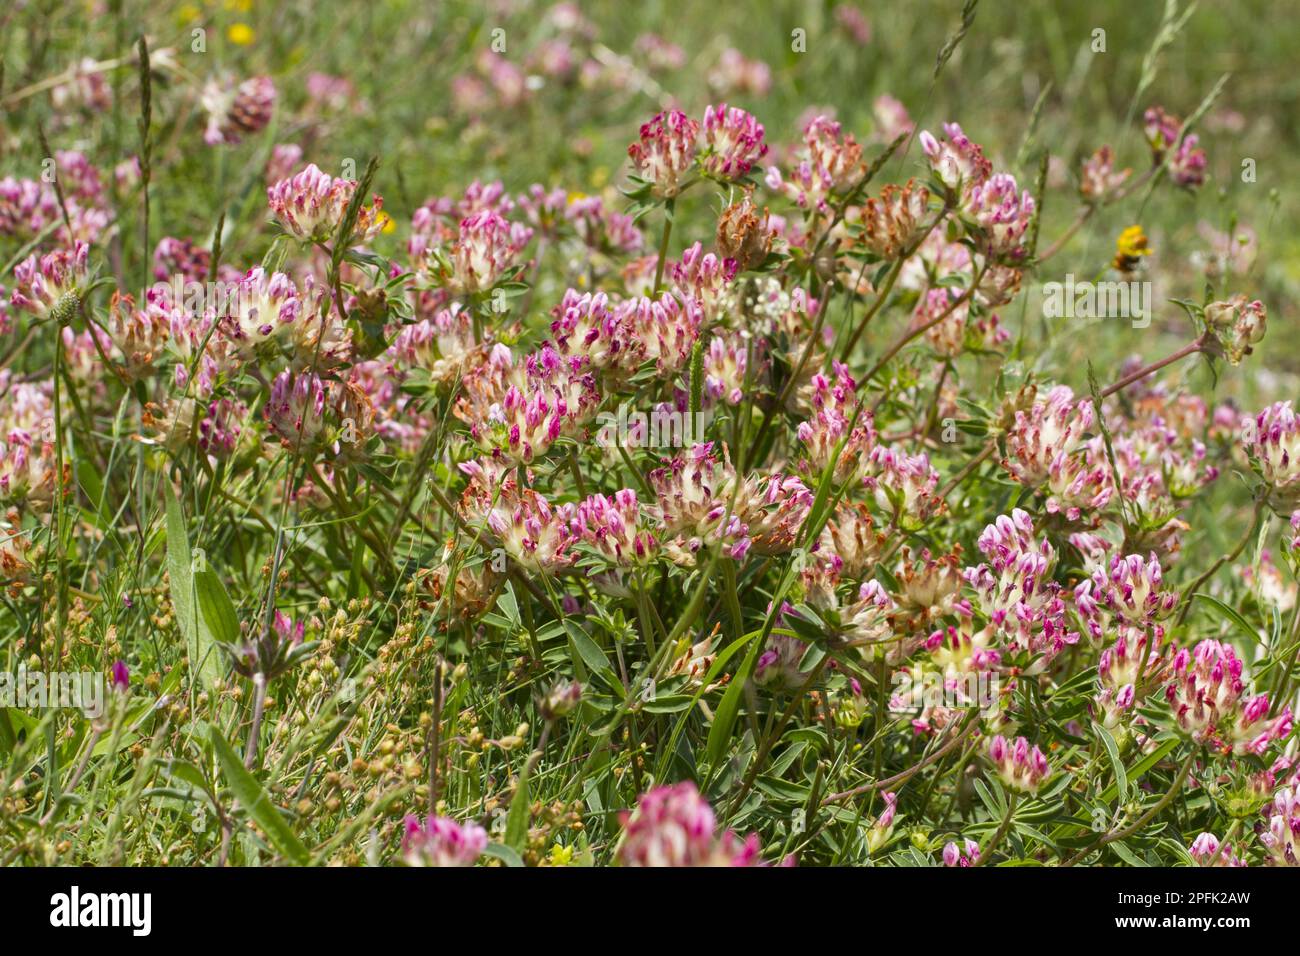 Kidney-vetch pink-flowered form, flowering, Ariege Pyrenees, Midi-Pyrenees, France, June, kidney vetch (Anthyllis vulneraria), French clover Stock Photo